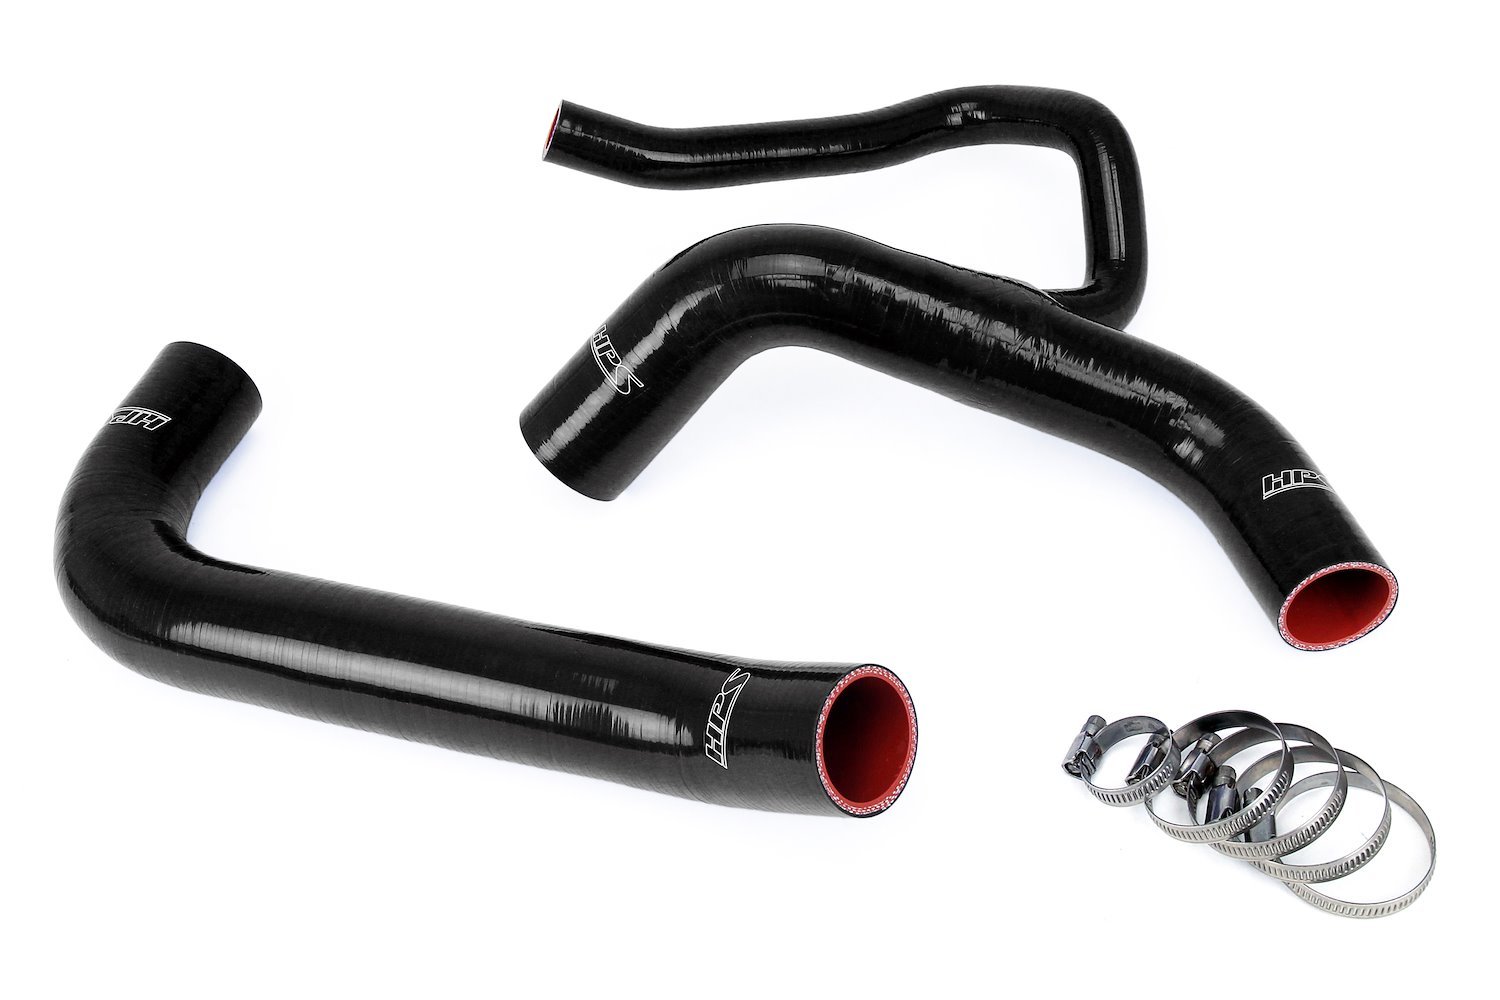 57-1848-BLK Radiator Hose Kit, 3-Ply Reinforced Silicone, Replaces Rubber Radiator Coolant Hoses